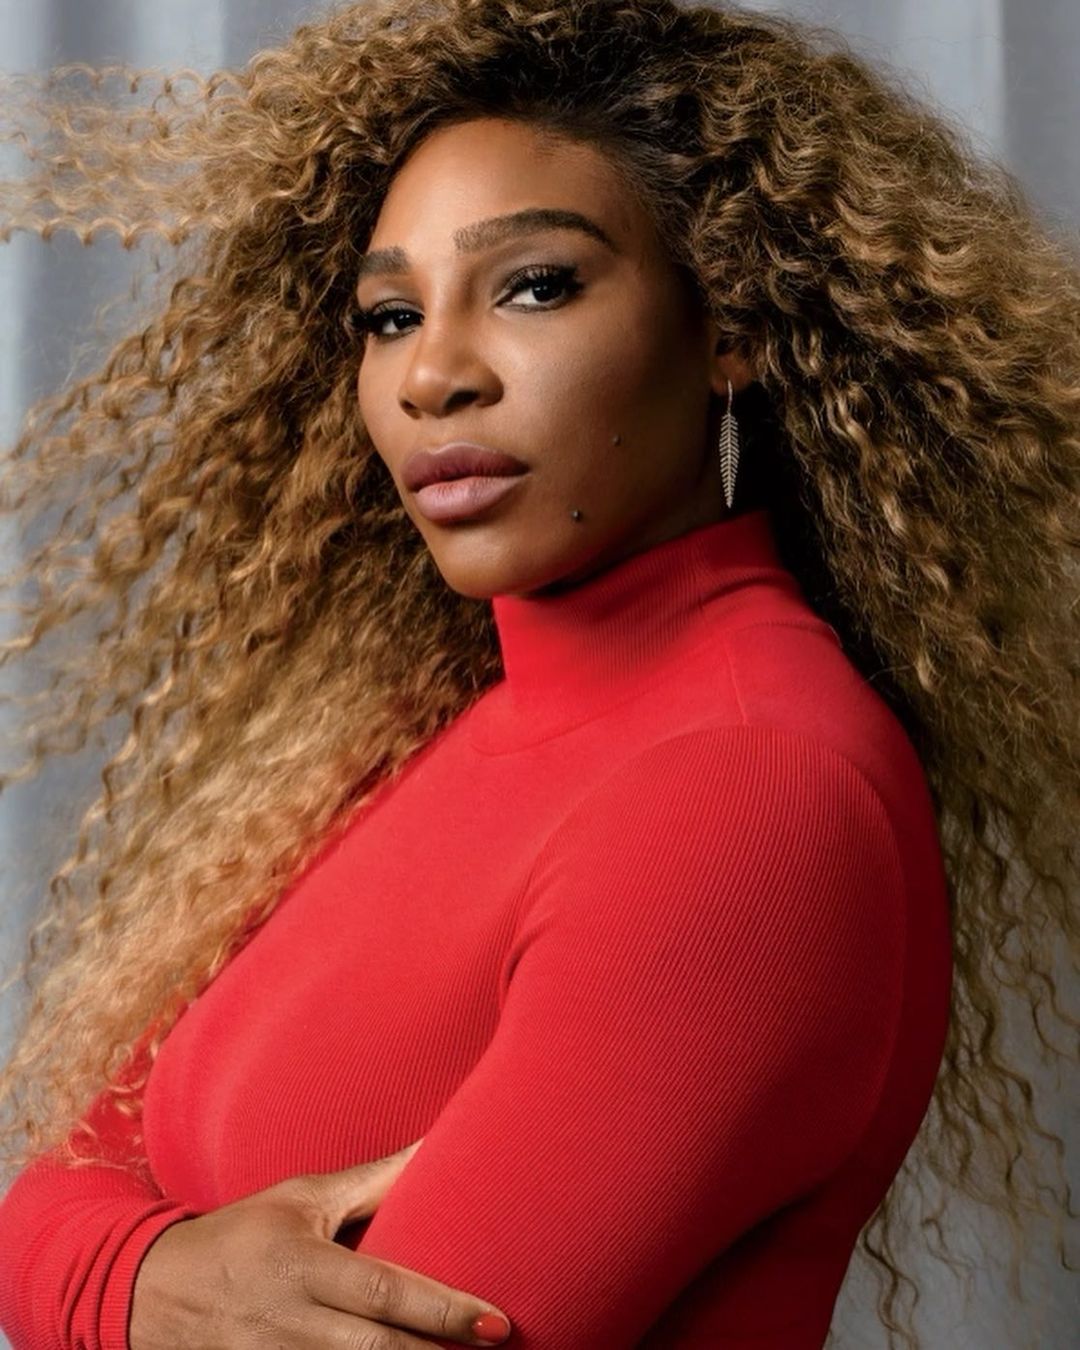 Serena Williams In Stunning Shots For FastCompany!